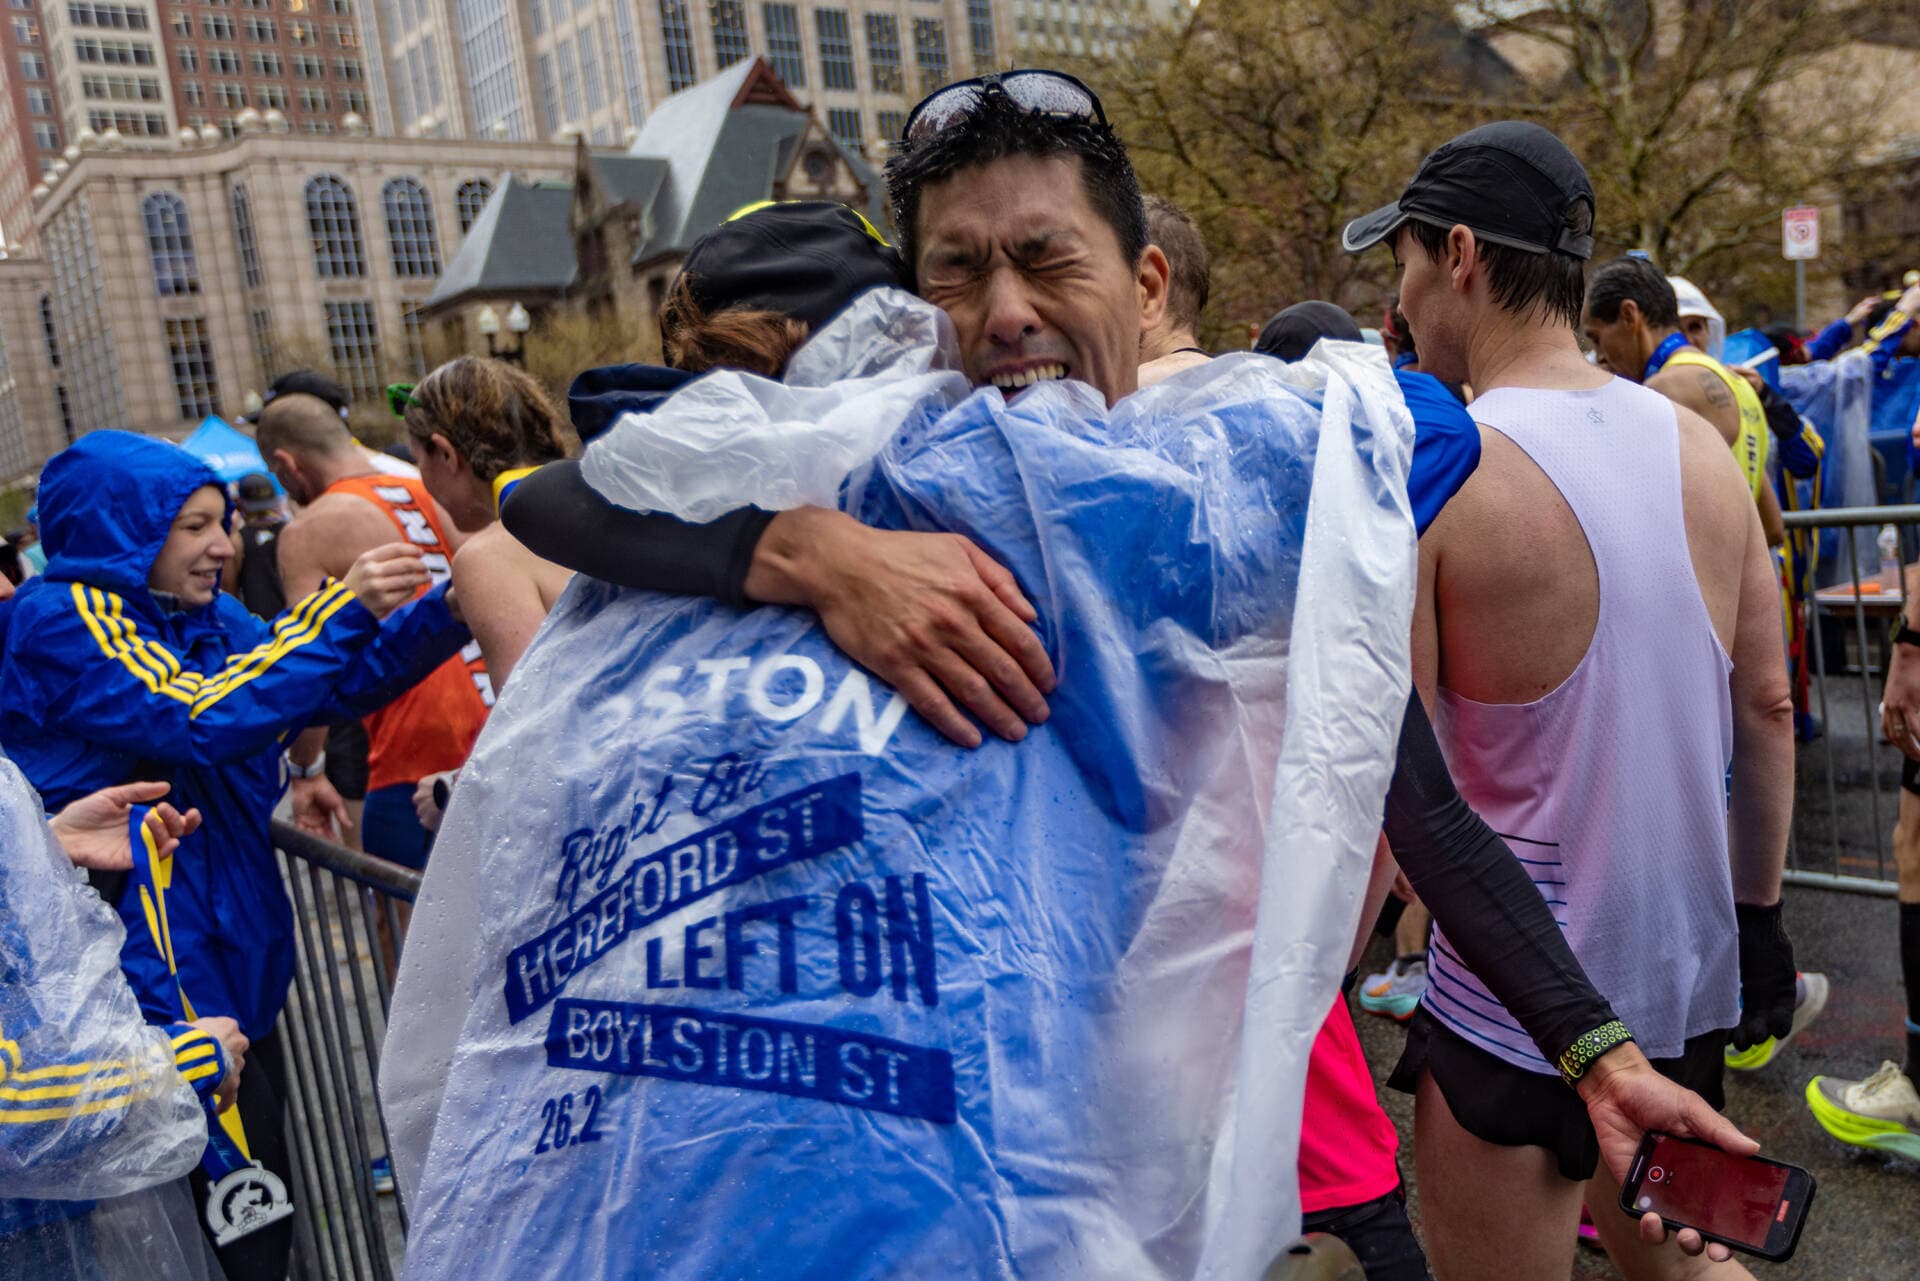 Henry To, of Australia, embraces a medal presenter after he finished running the Boston Marathon. (Jesse Costa/WBUR)